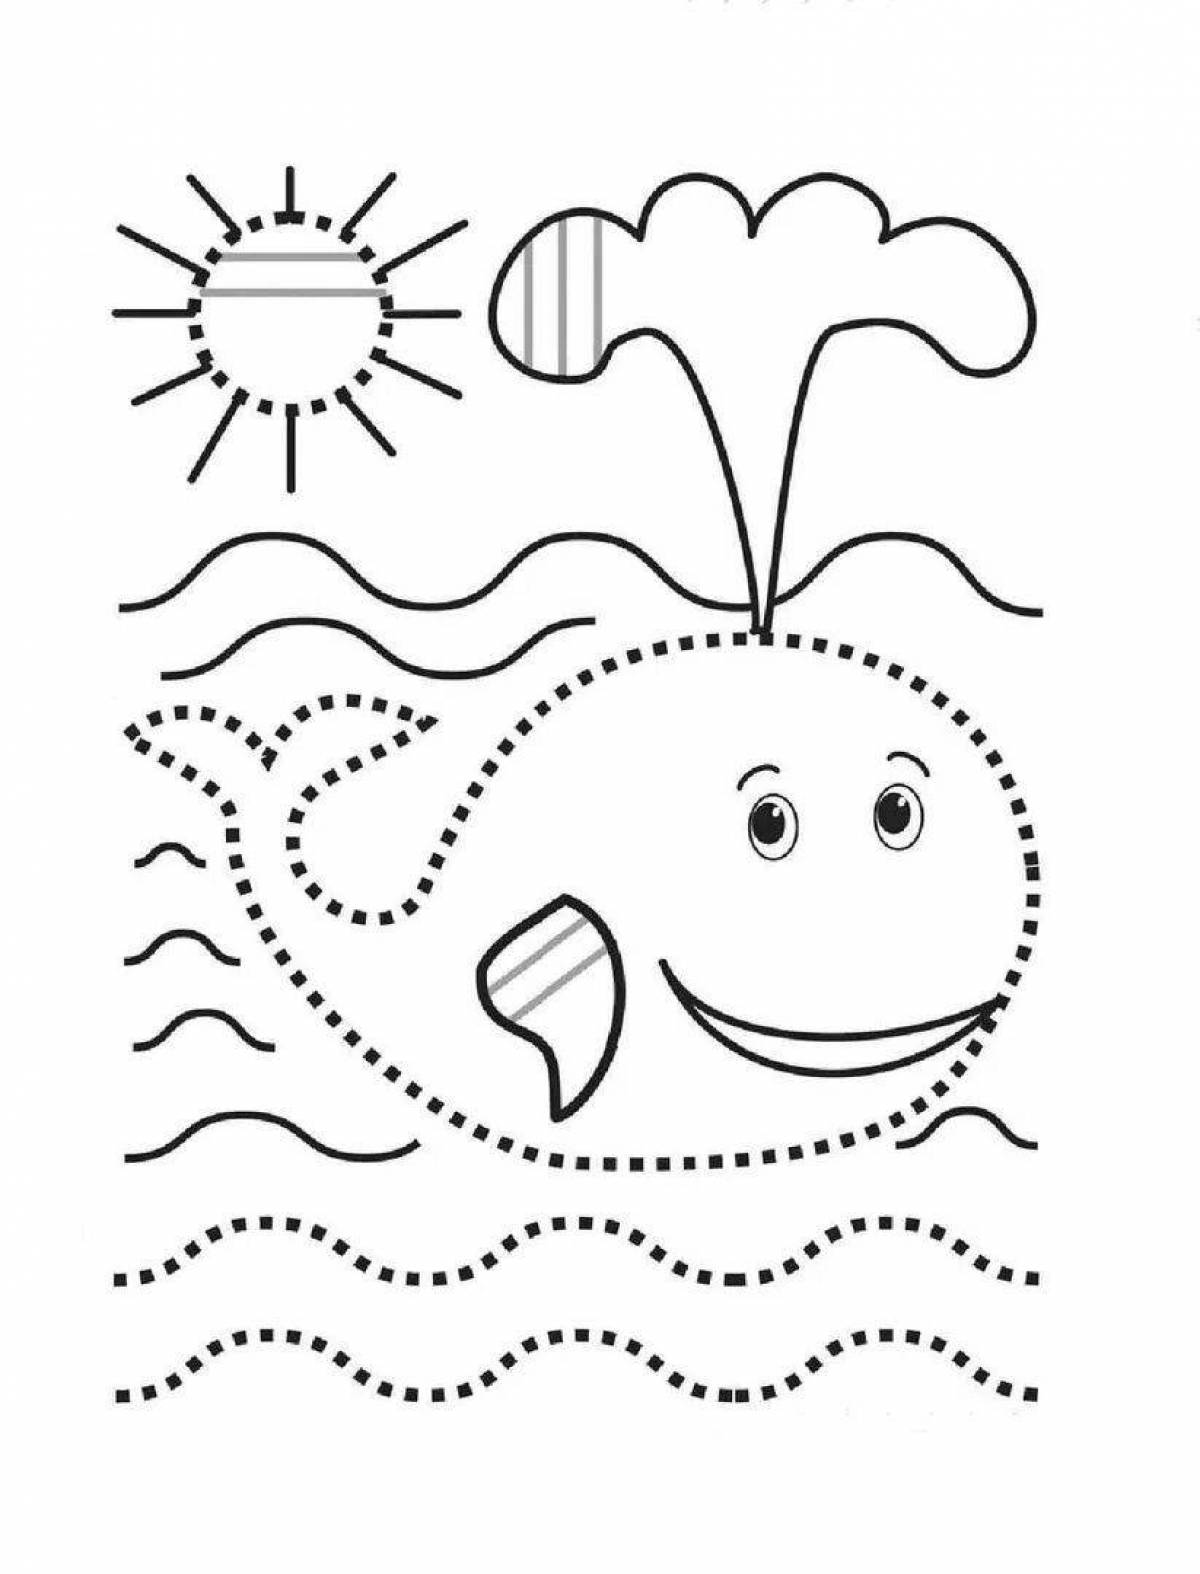 Fun coloring pages with dotted lines